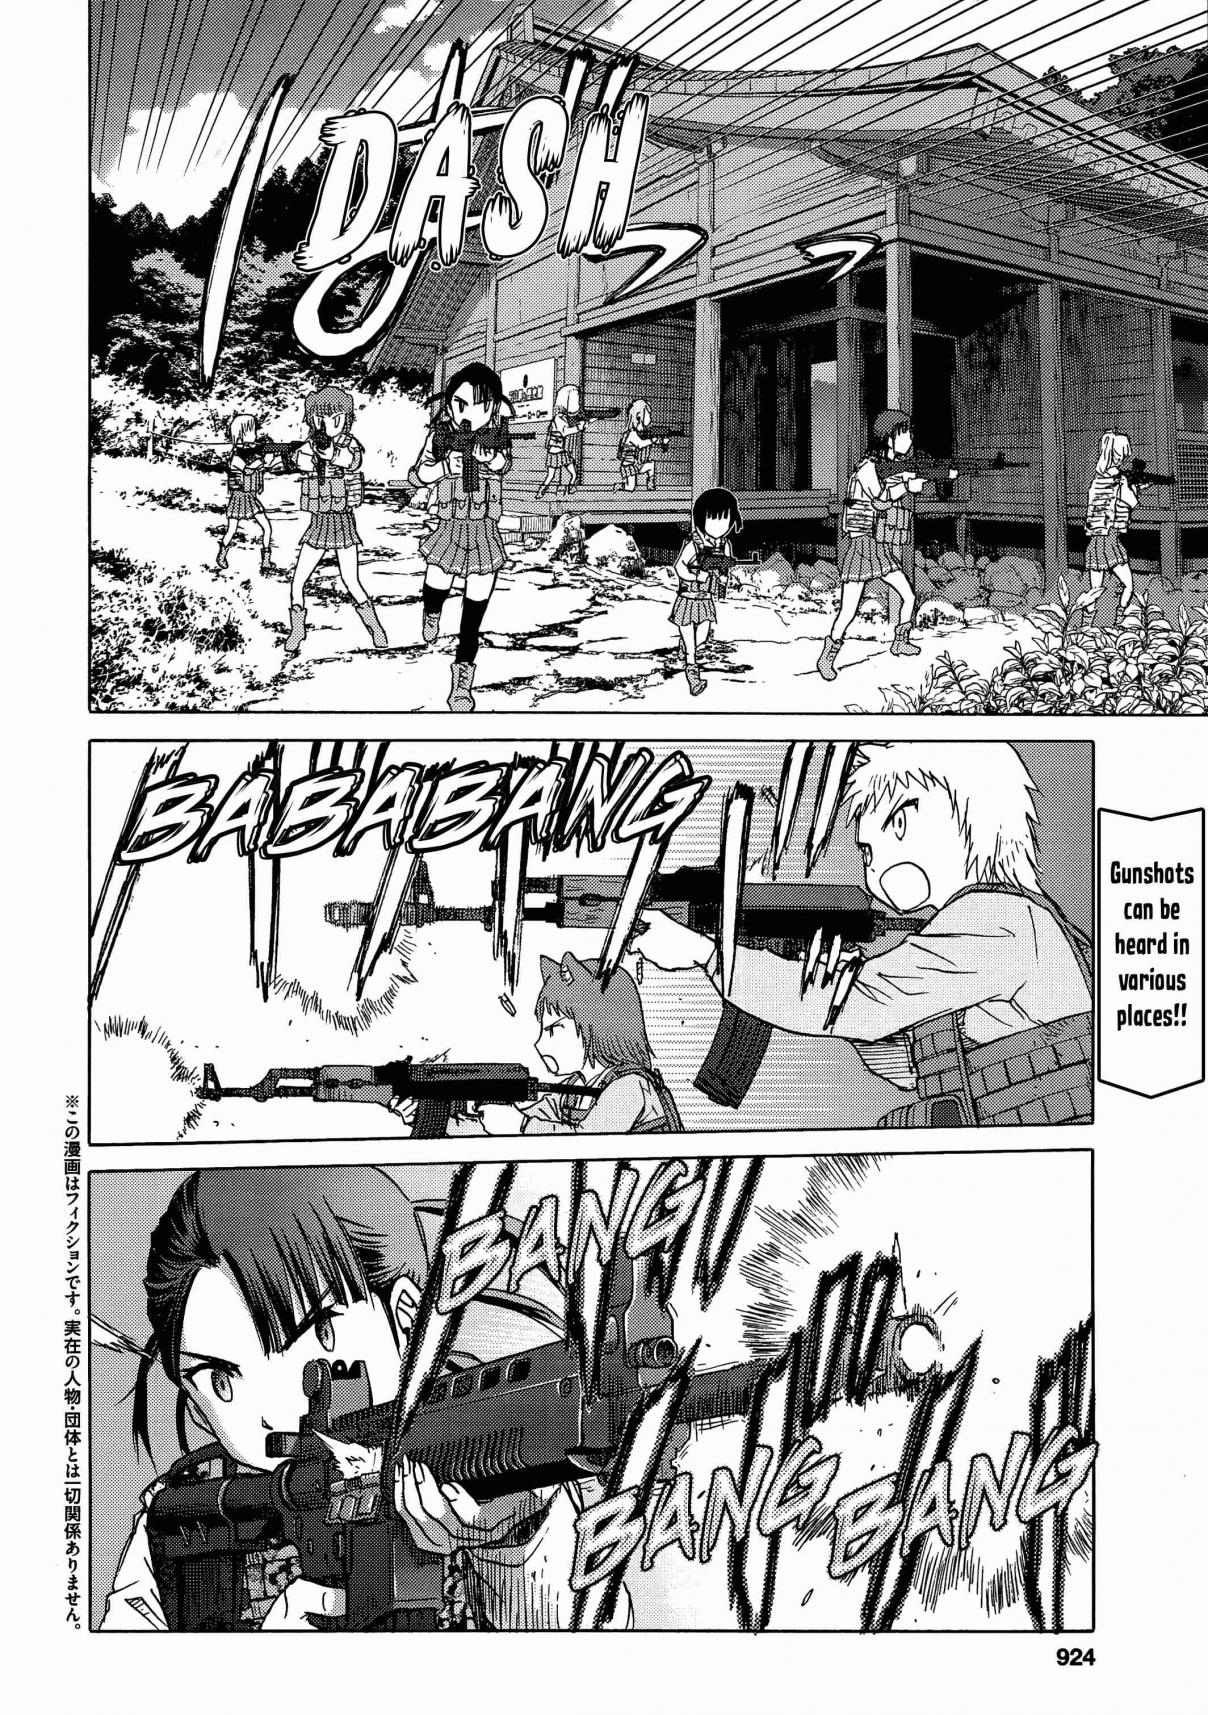 Upotte!! Ch. 91 At the Lake's Bank